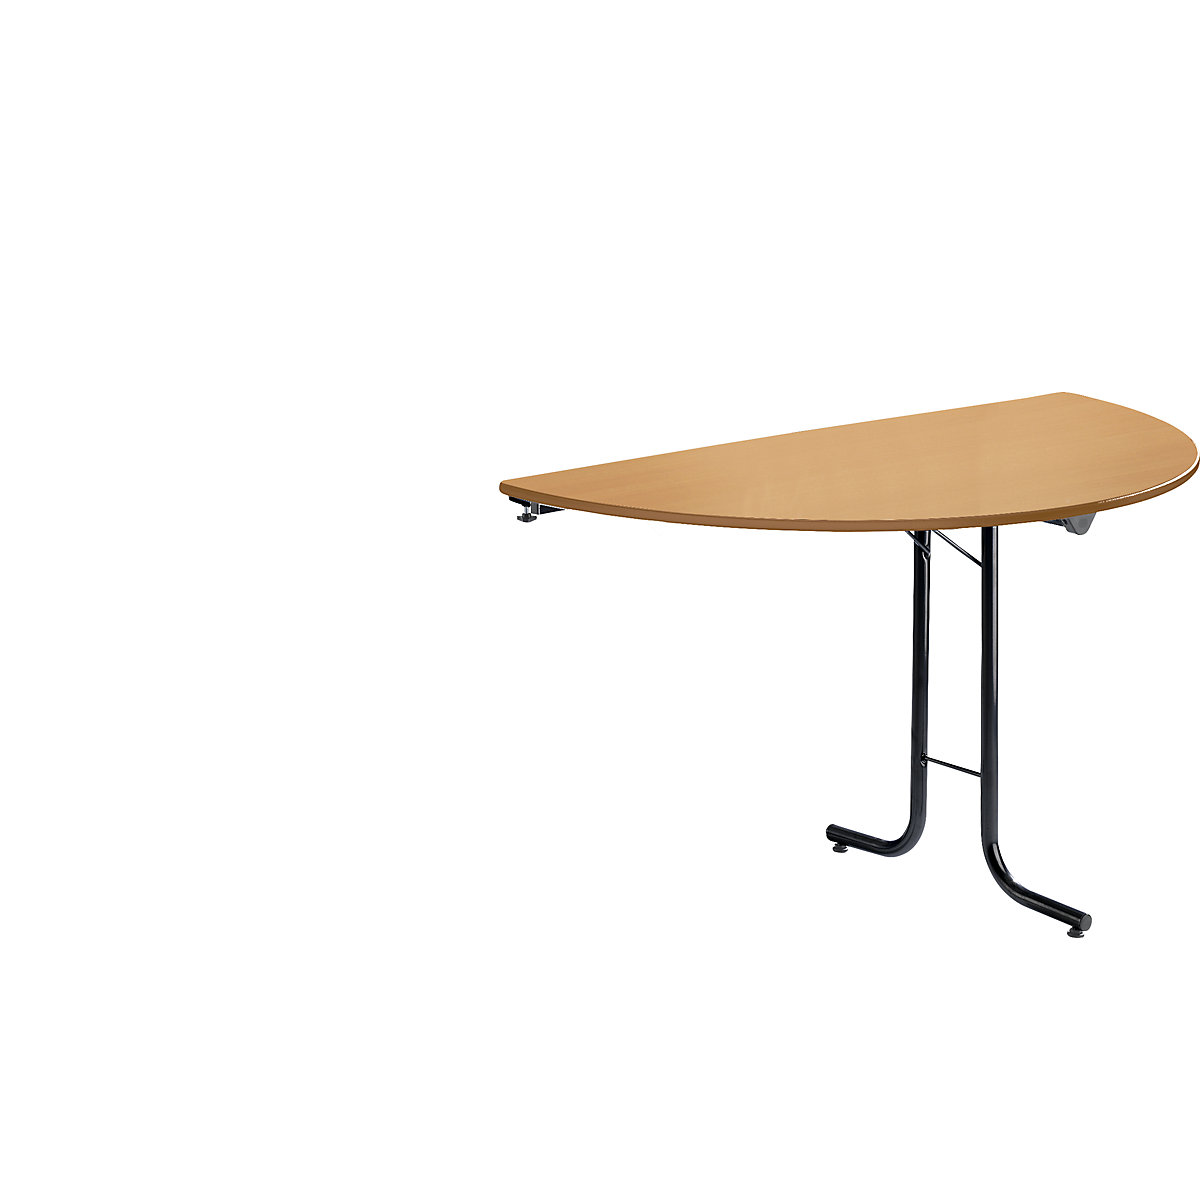 Extension table for folding table, semicircular top, 1400 x 700 mm, black frame, beech finish tabletop-5